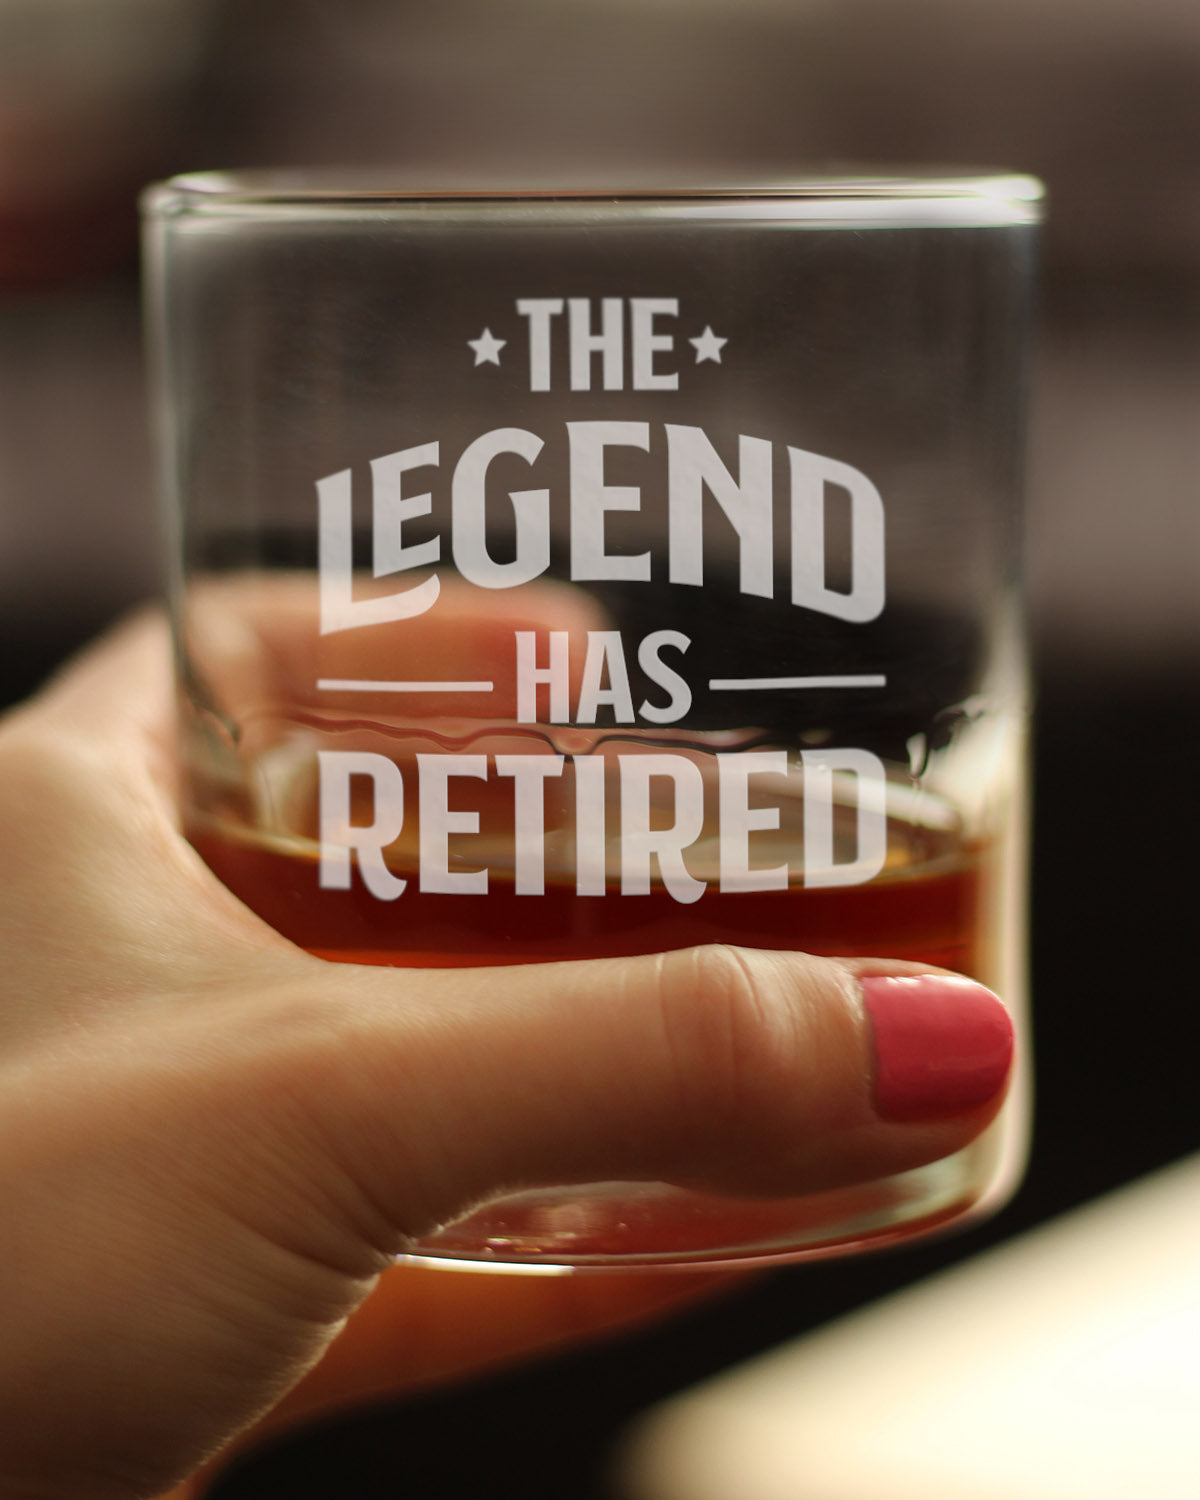 The Legend Has Retired - Whiskey Rocks Glass - Funny Retirement Gifts for Boss or Coworkers - 10.25 Oz